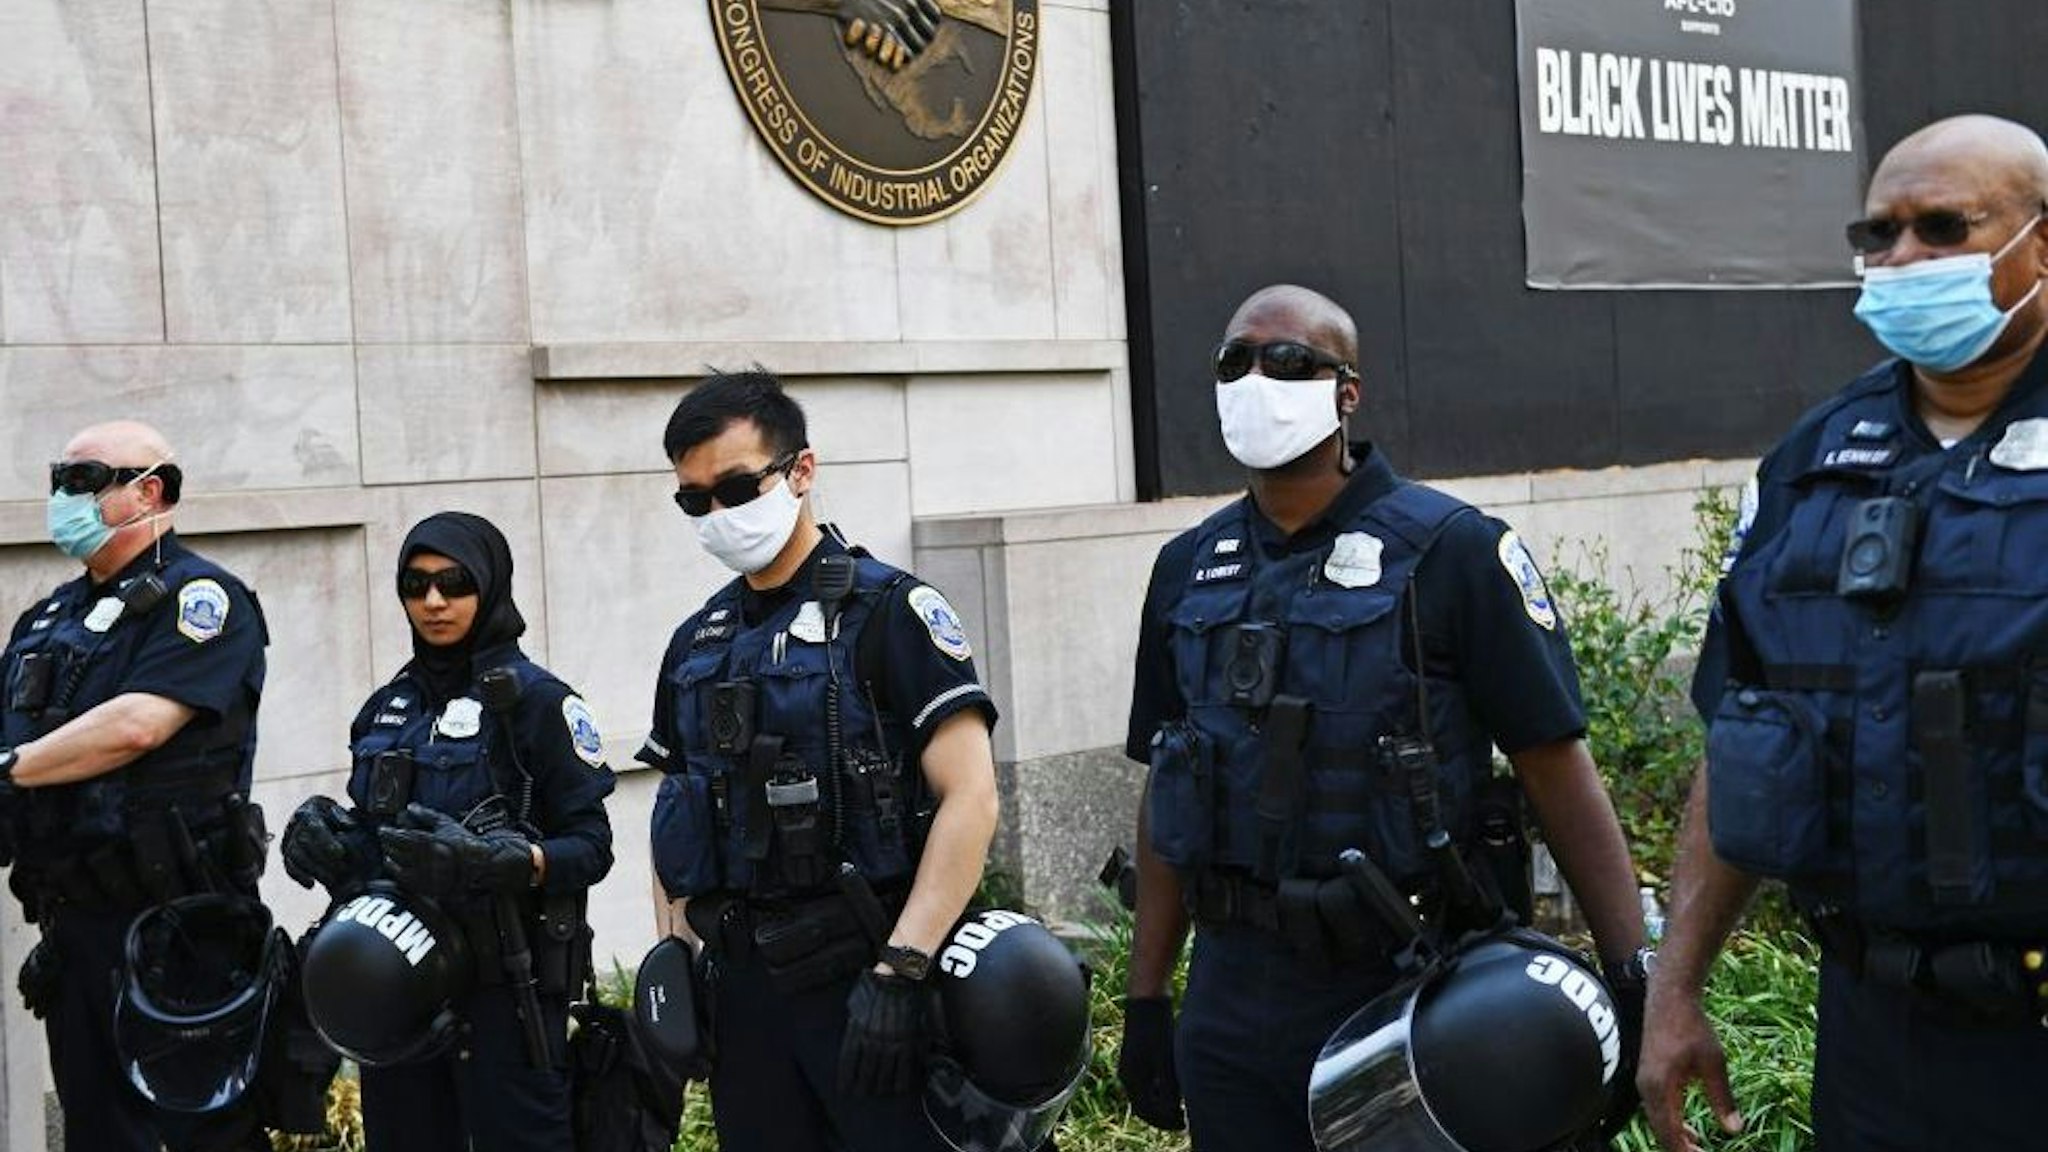 A line of police officers stand at the readyd with riot gear as they form a security perimeter on 16th St. NW near Black Lives Matter Plazza and Lafayette Square near the White House in Washington, DC on June 23, 2020. - US President Trump on his way to Arizona warned that protesters who attempted to establish an "autonomous zone" in the US capital would be met with "serious force," following a night of protests at Lafayette Square where a crowd of protestors tried to topple the statue of Andrew Jackson. (Photo by Brendan Smialowski / AFP)